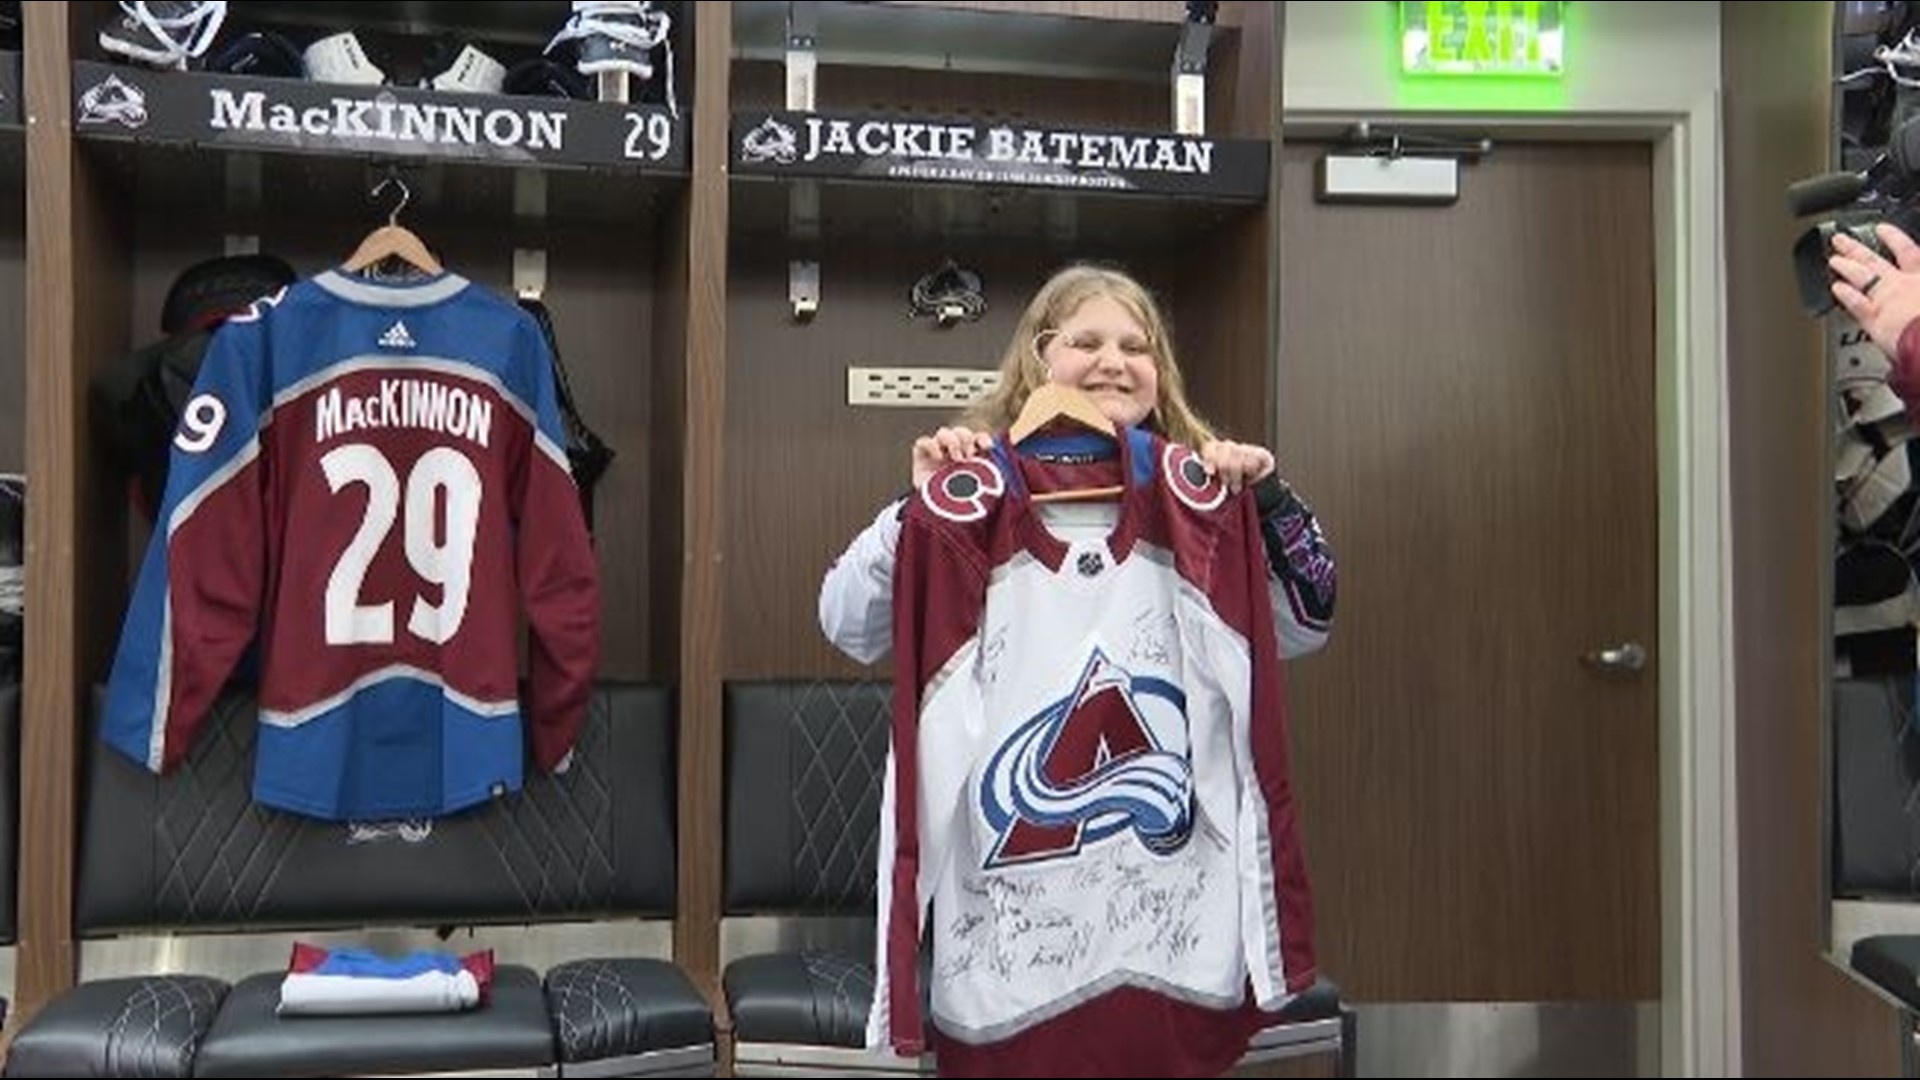 Jackie Bateman spent a day with the Avalanche and even got a gift from her favorite player